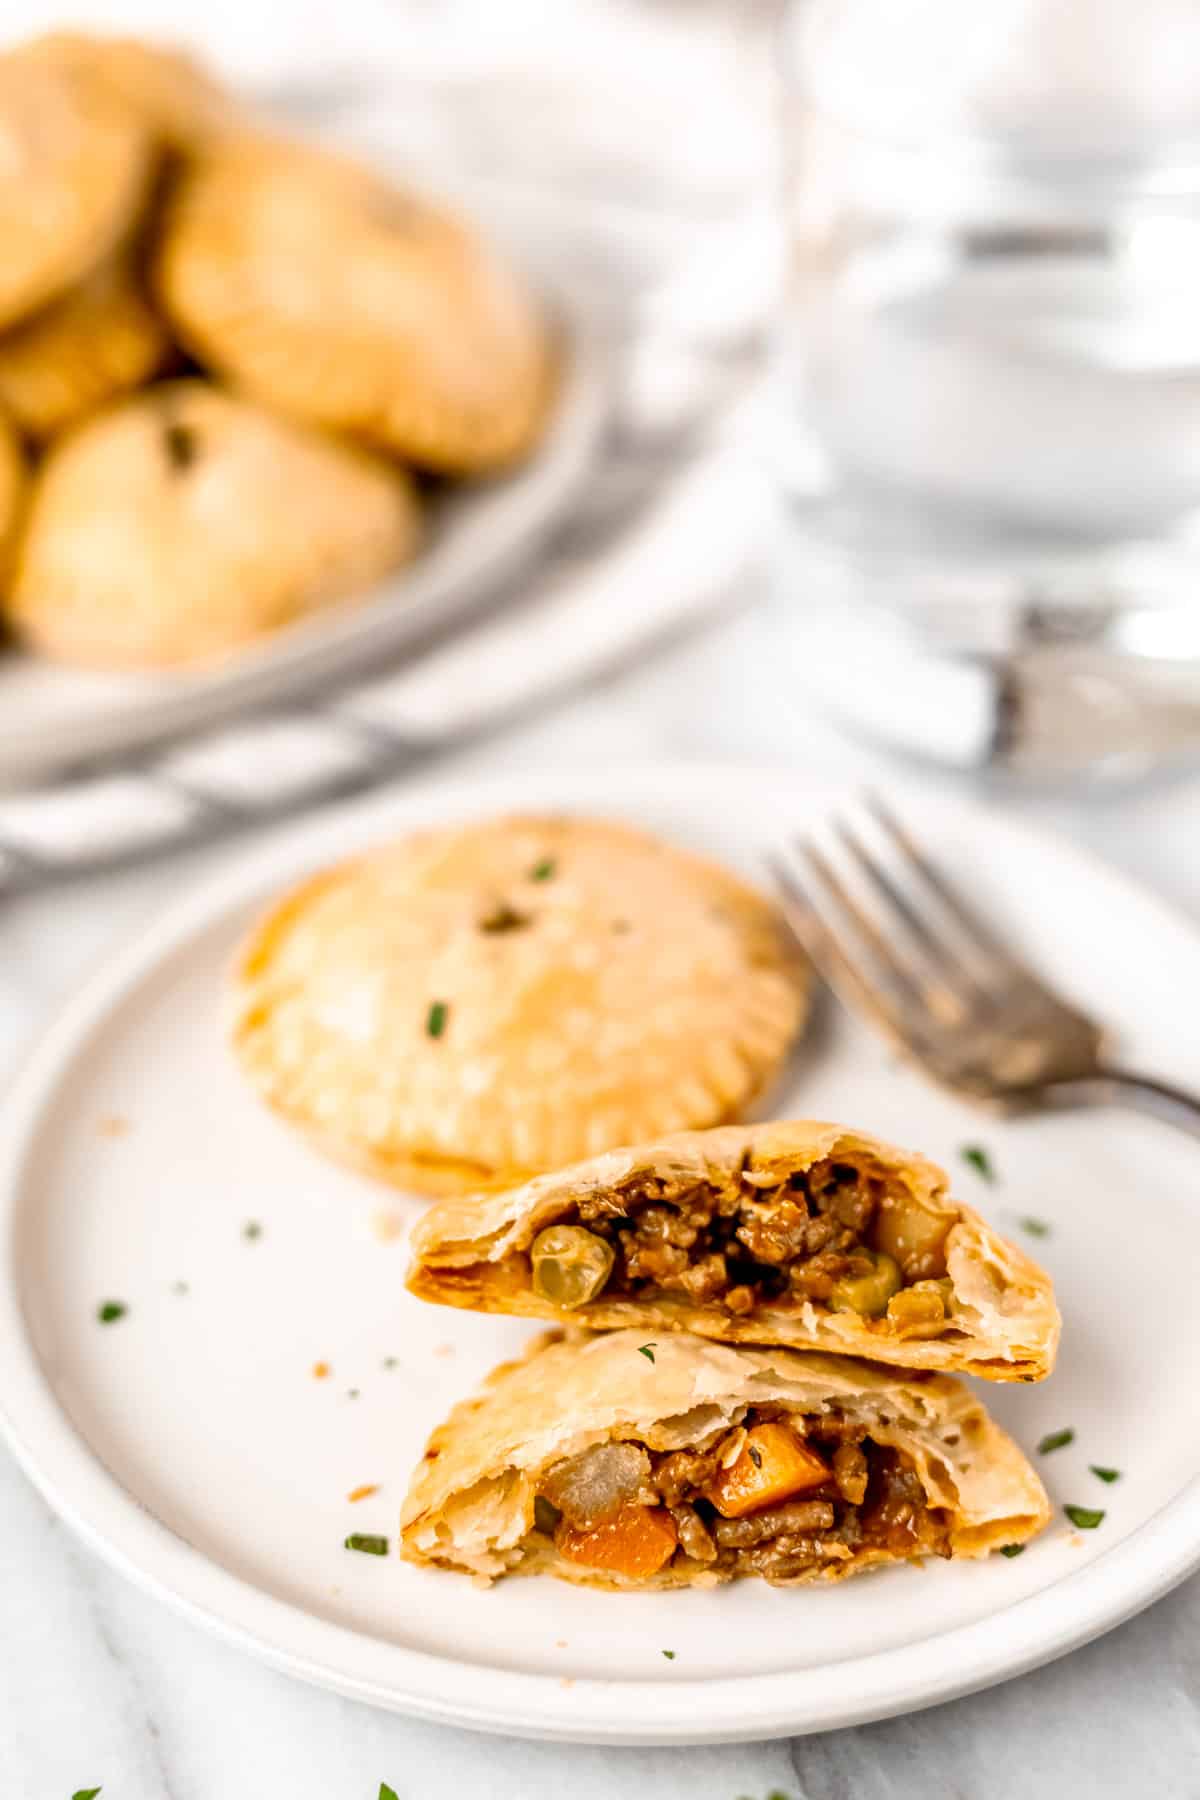 A ground beef hand pie broken in half on a white plate with a fork and second hand pie on it.